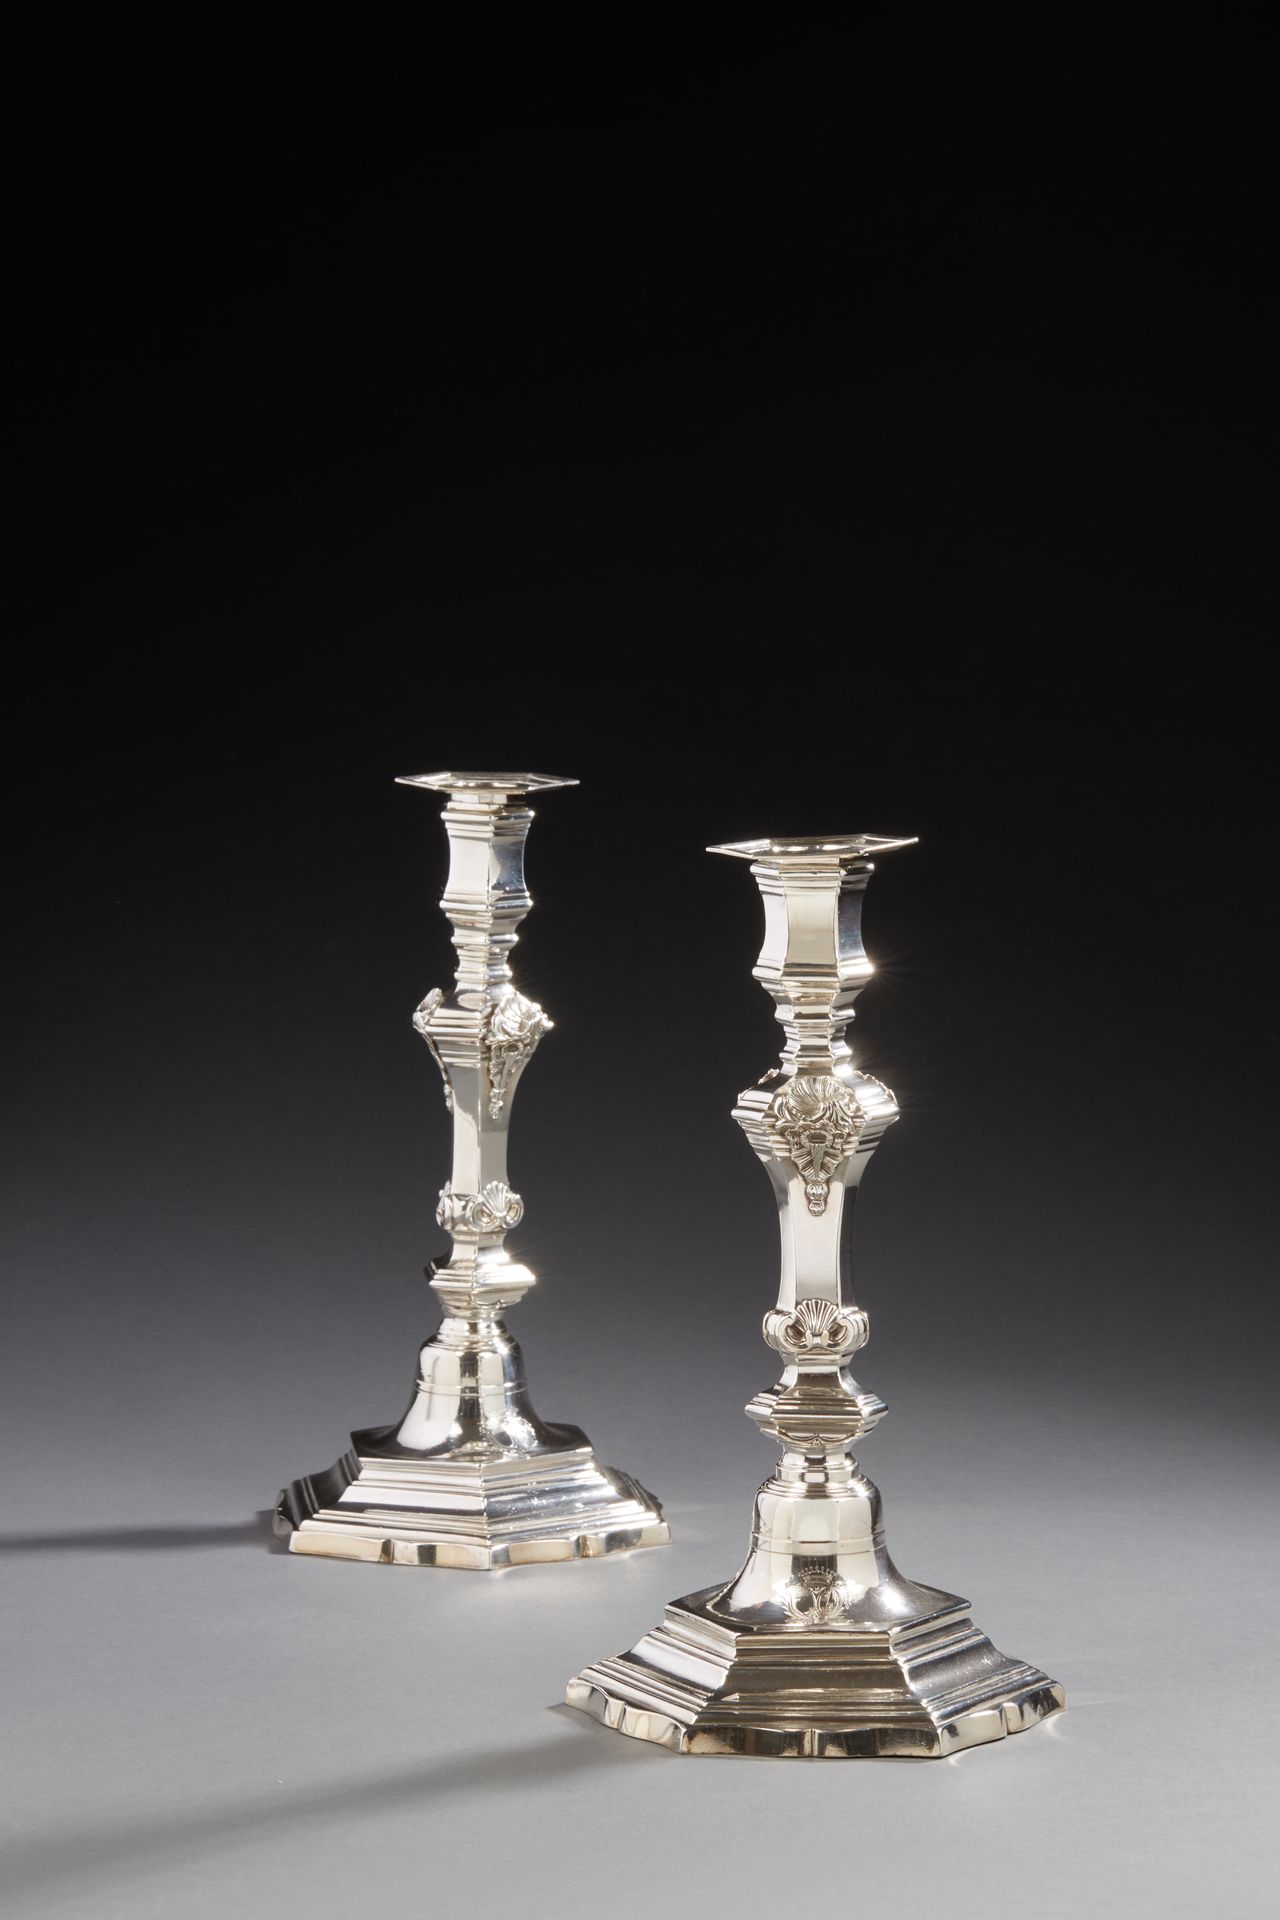 Null MONTPELLIER 1741
Pair of silver candlesticks and their wicks, probably from&hellip;